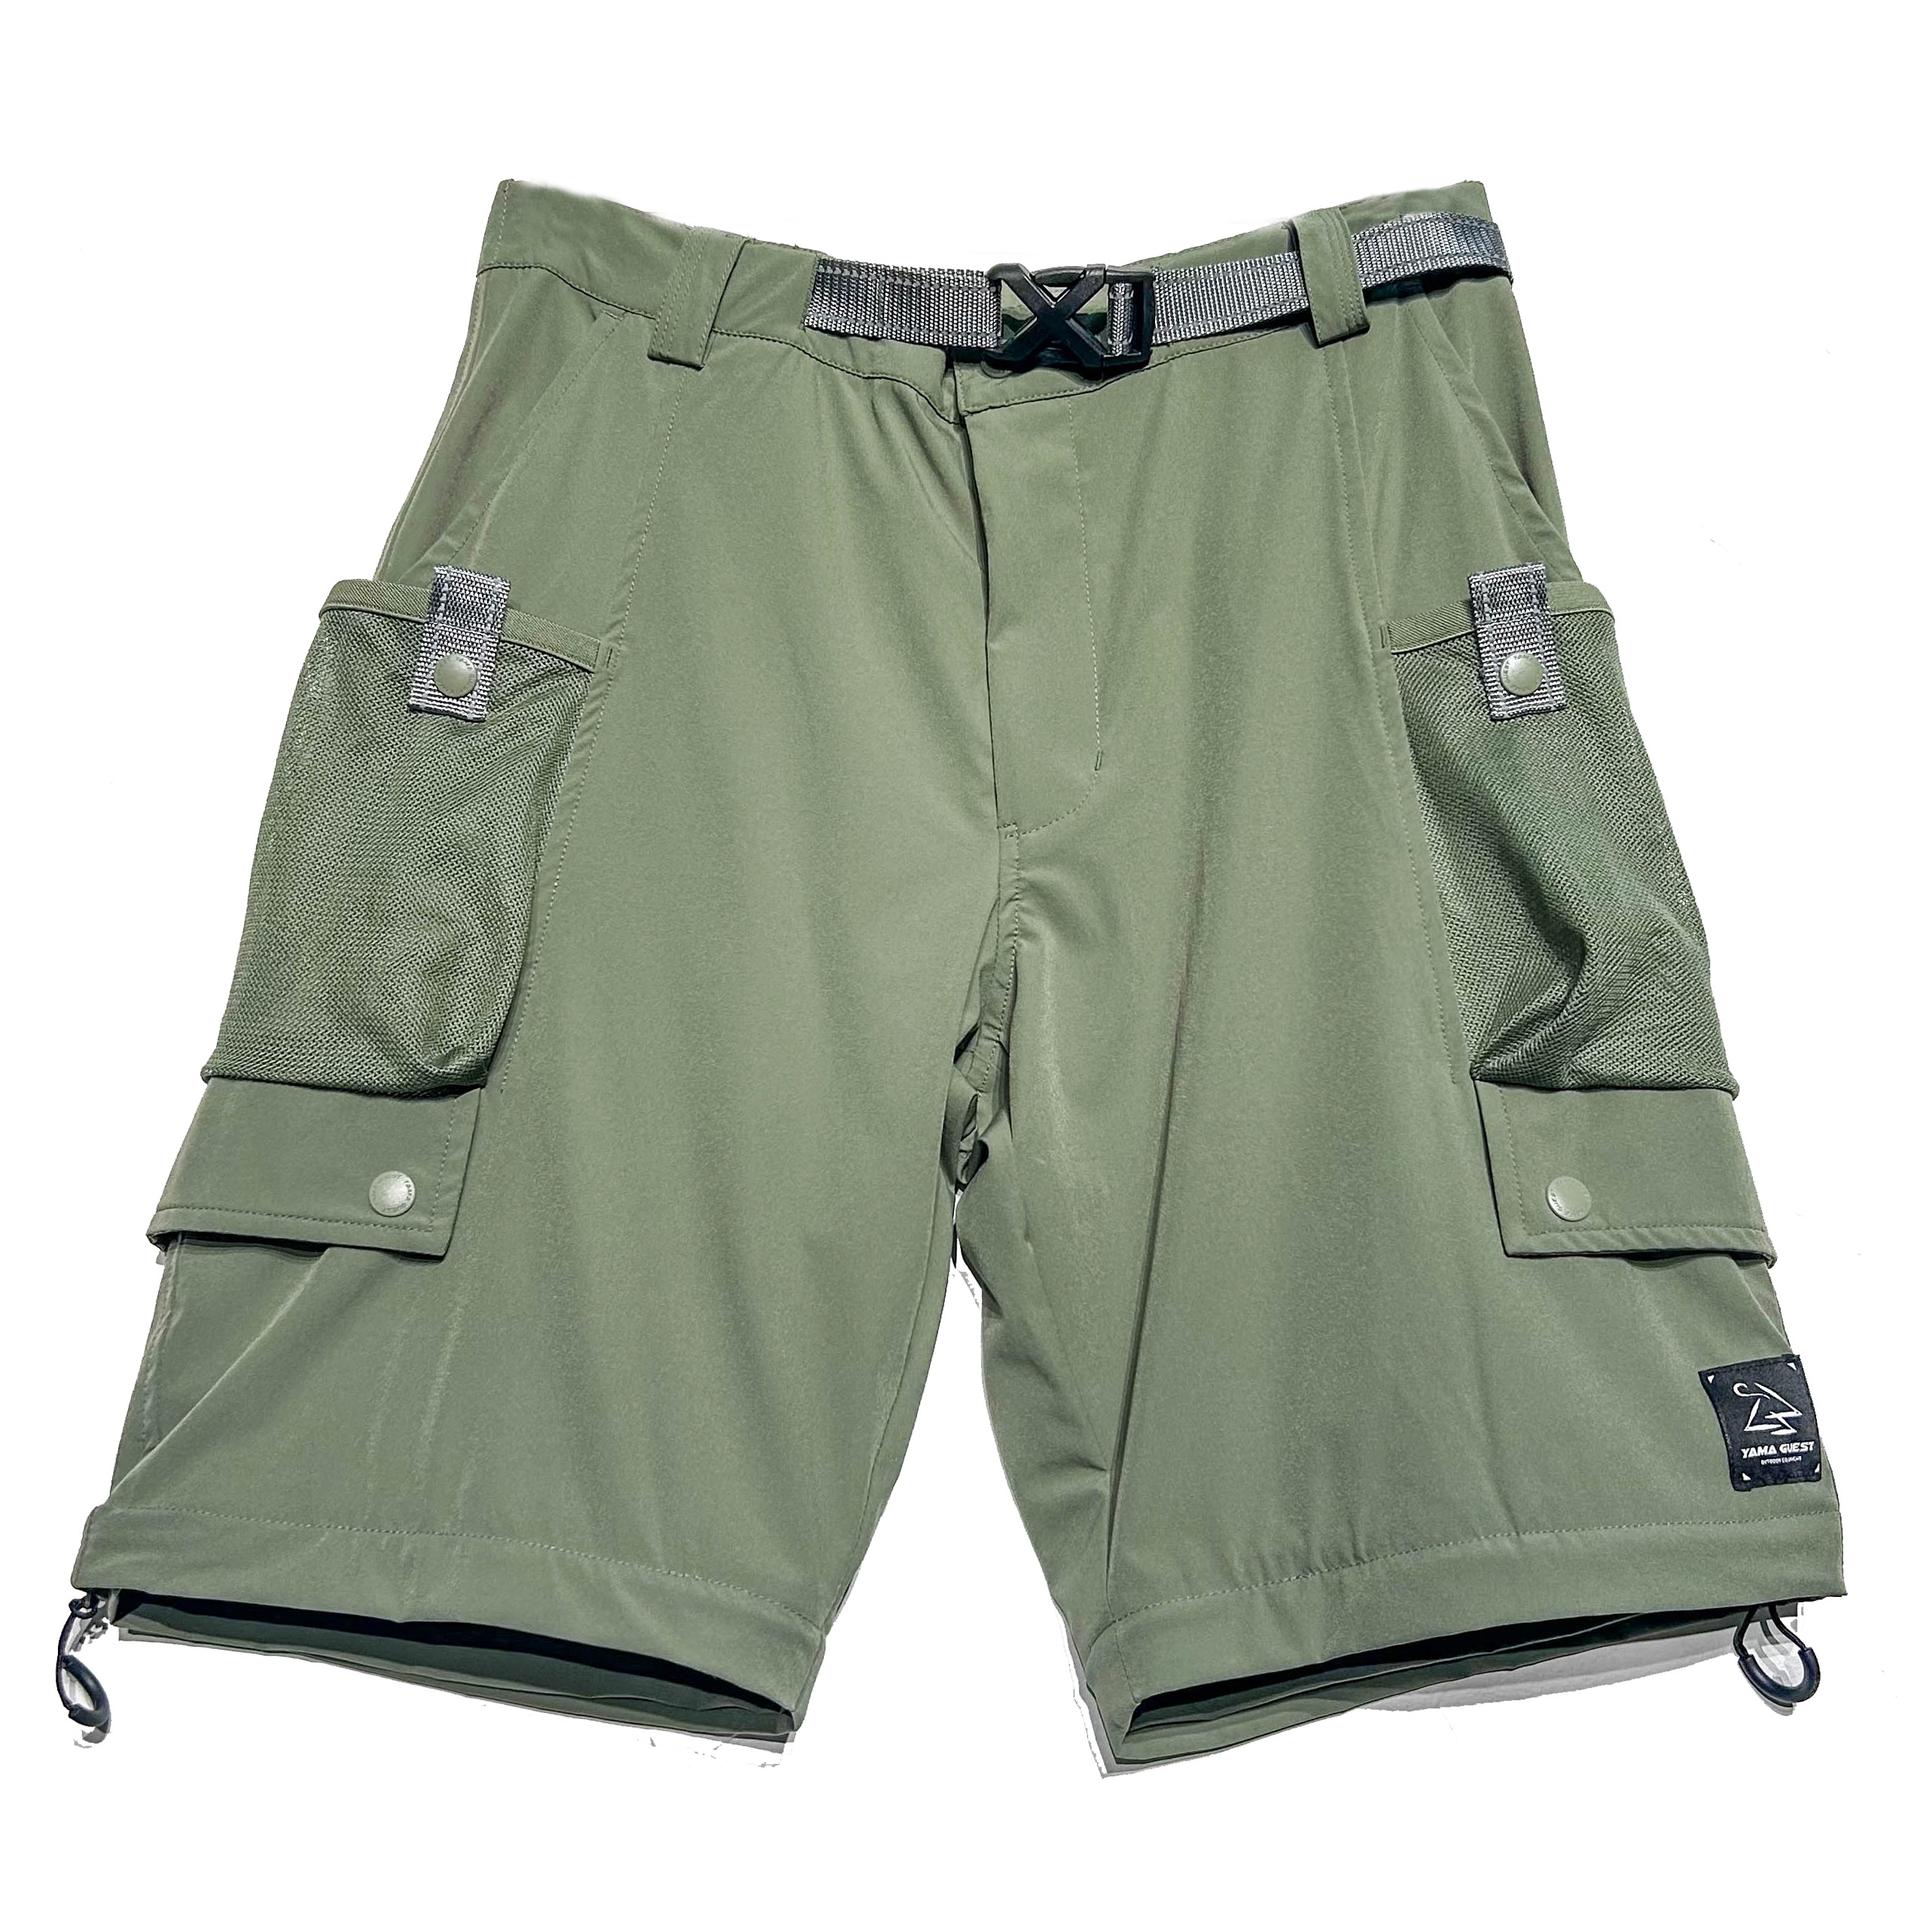 YamaGuest LP08 2-in-1 Outdoor Trousers (GRD)